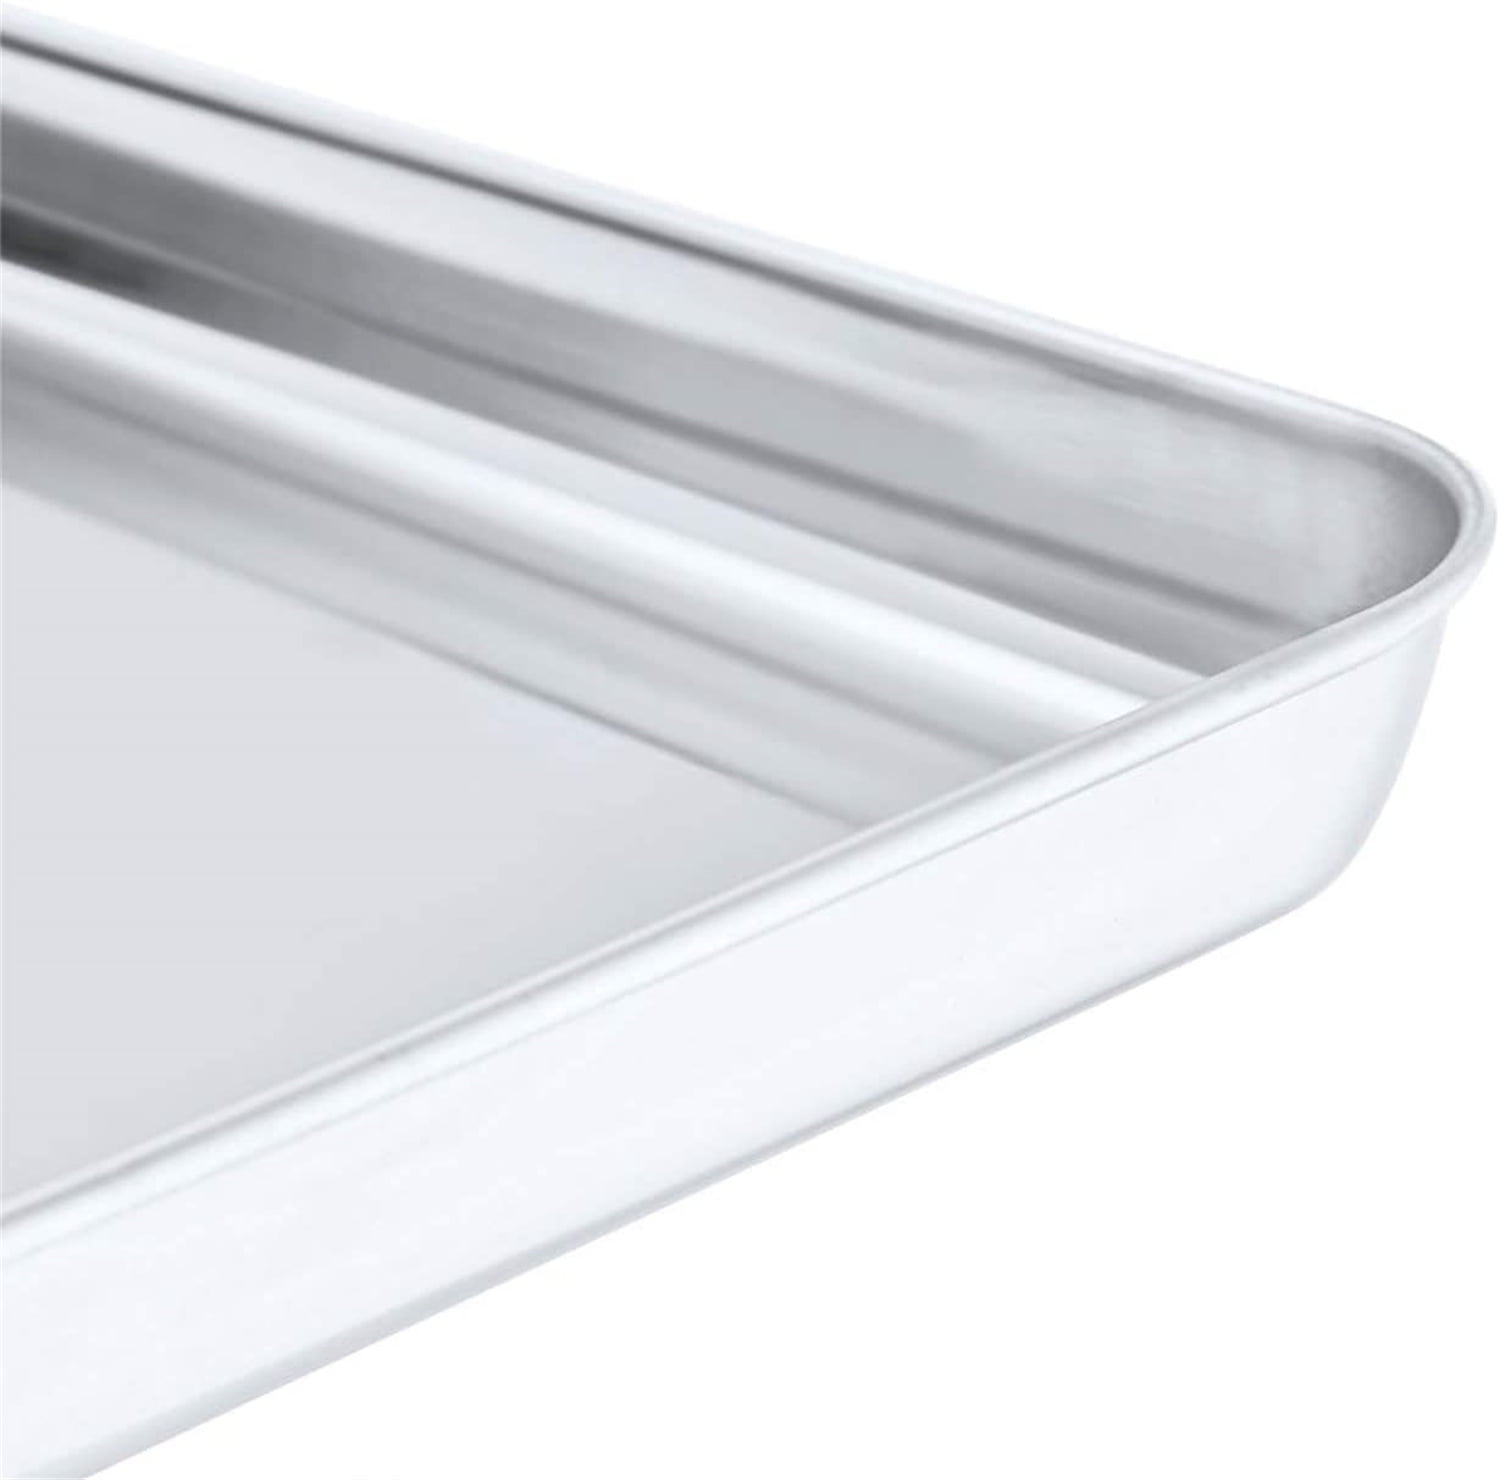 Baking Sheet Pan for Toaster Oven, Stainless Steel Baking Pans Small Metal  Cookie Sheets by Umite Chef, Superior Mirror Finish Easy Clean, Dishwasher  Safe, 9 x 7 x 1 inch, 3 Piece/set 